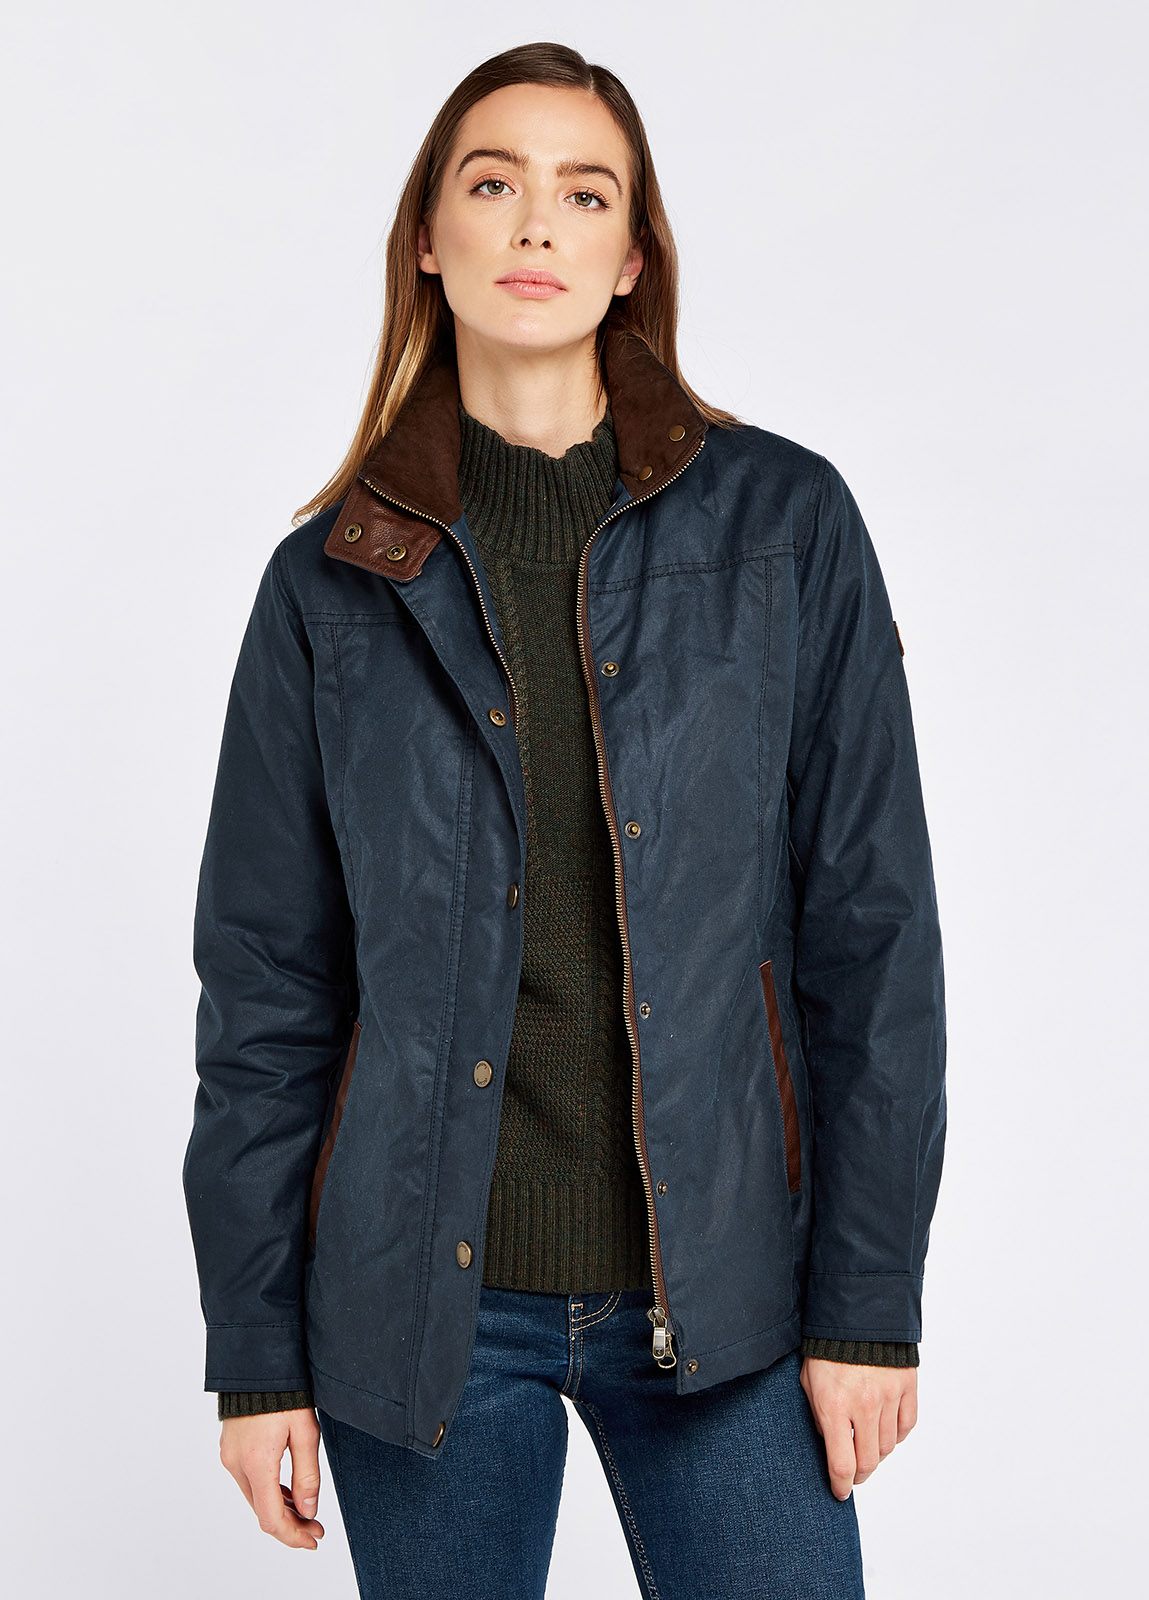 Waist up view of a female model wearing a Dubarry Mountrath Waxed jacket, ocean blue coloured jacket with full zip and buttons, brown edged pockets, inner collar and brown inside collar